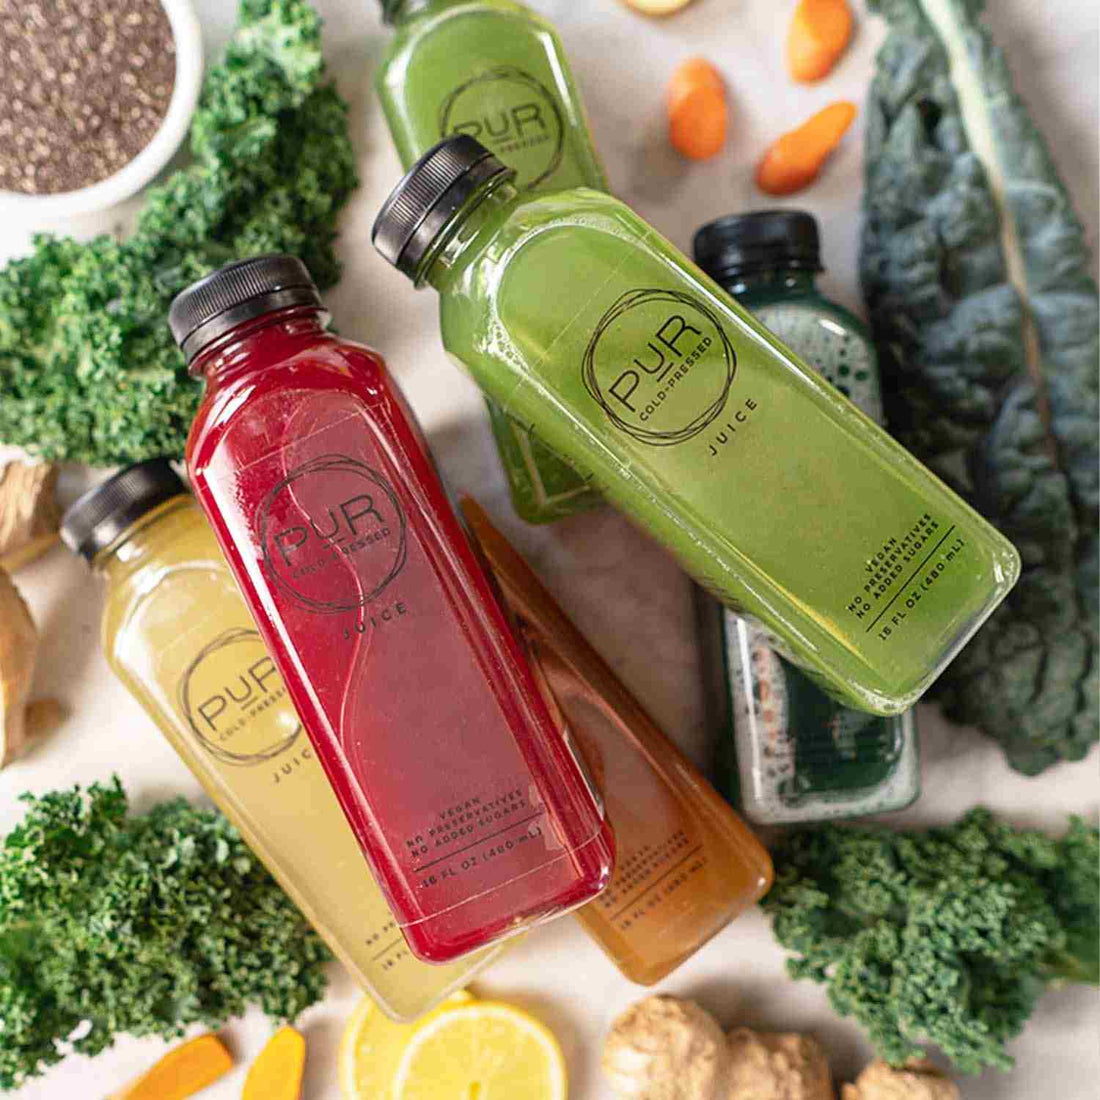 Health Benefits Of A 1 Day Juice Cleanse - PUR Cold Pressed Juice